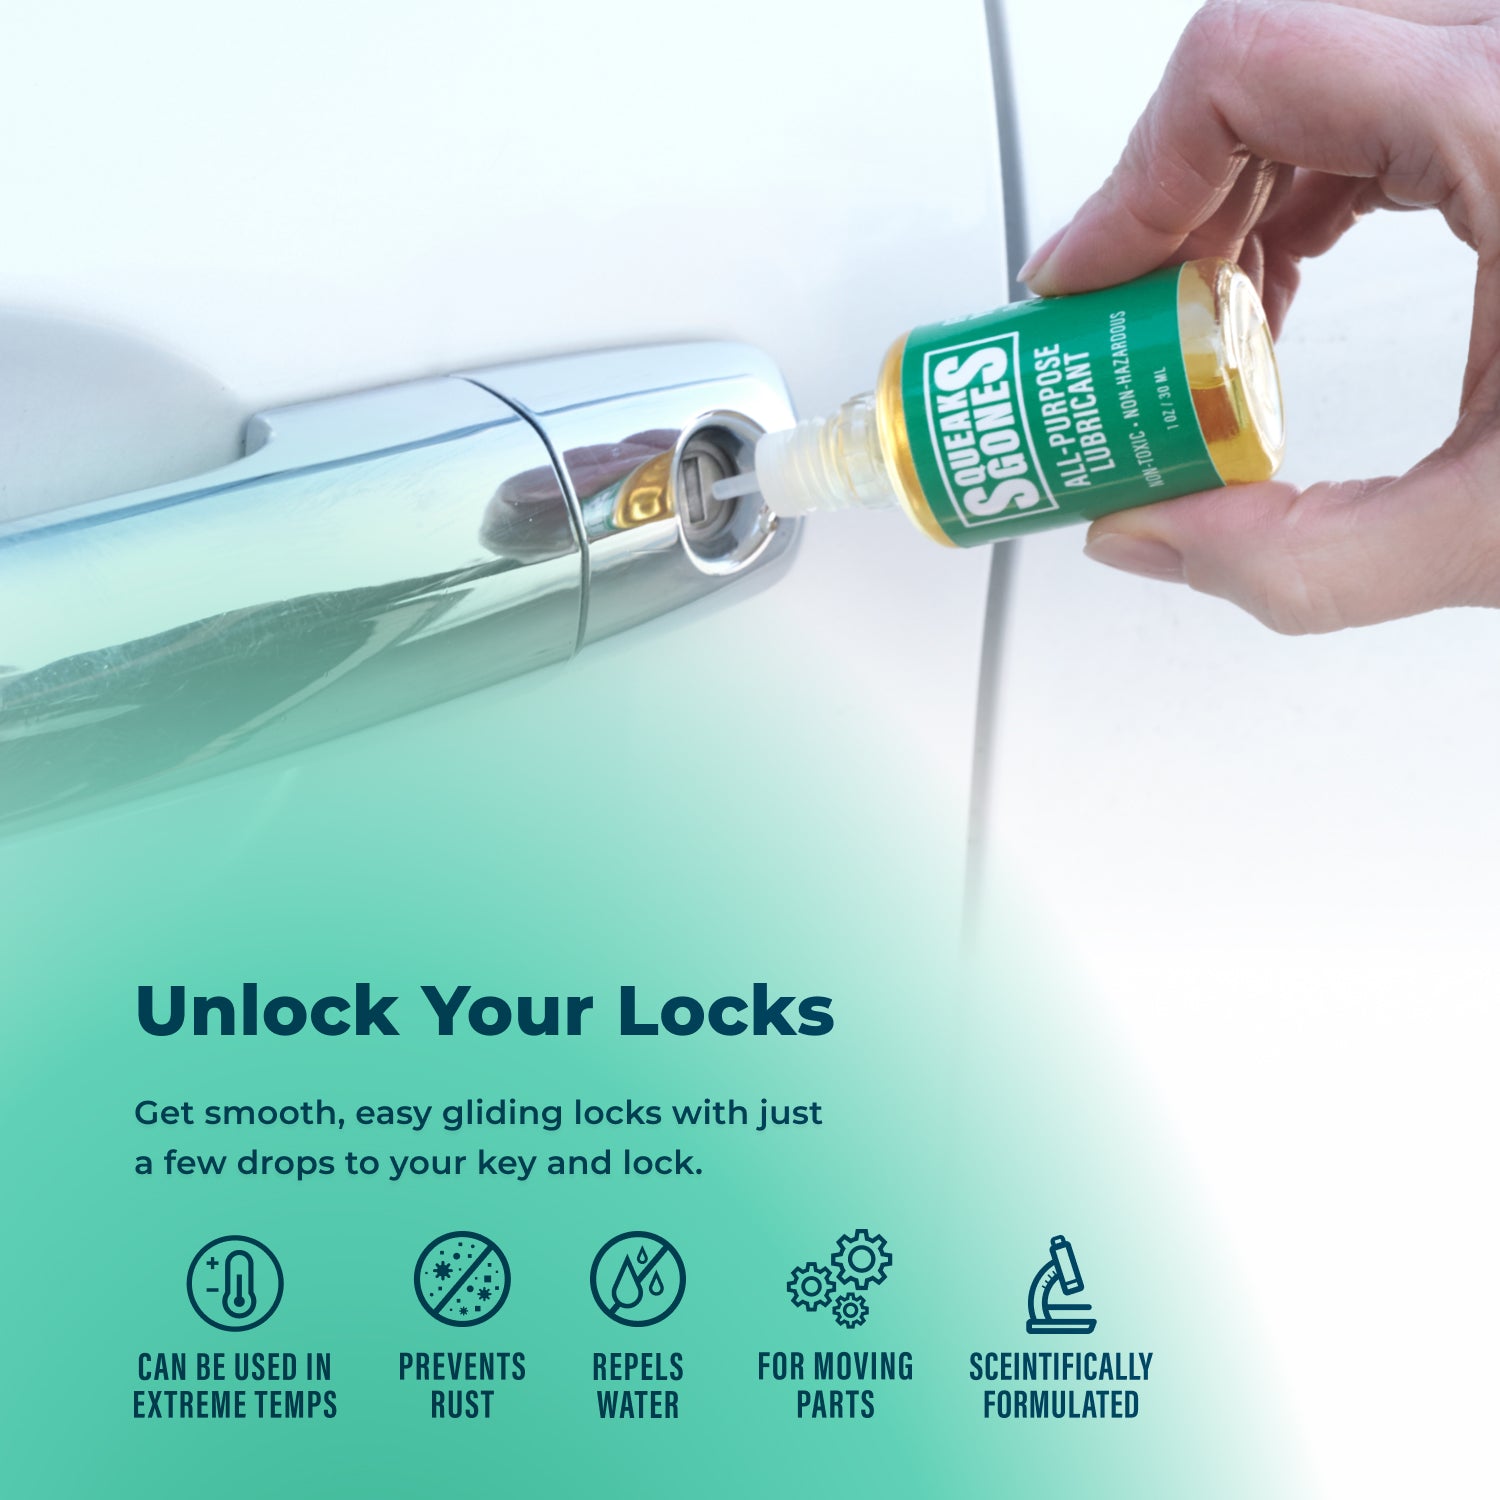 Get smooth, easy gliding locks with just a few drops to your key and lock. SqueaksGone